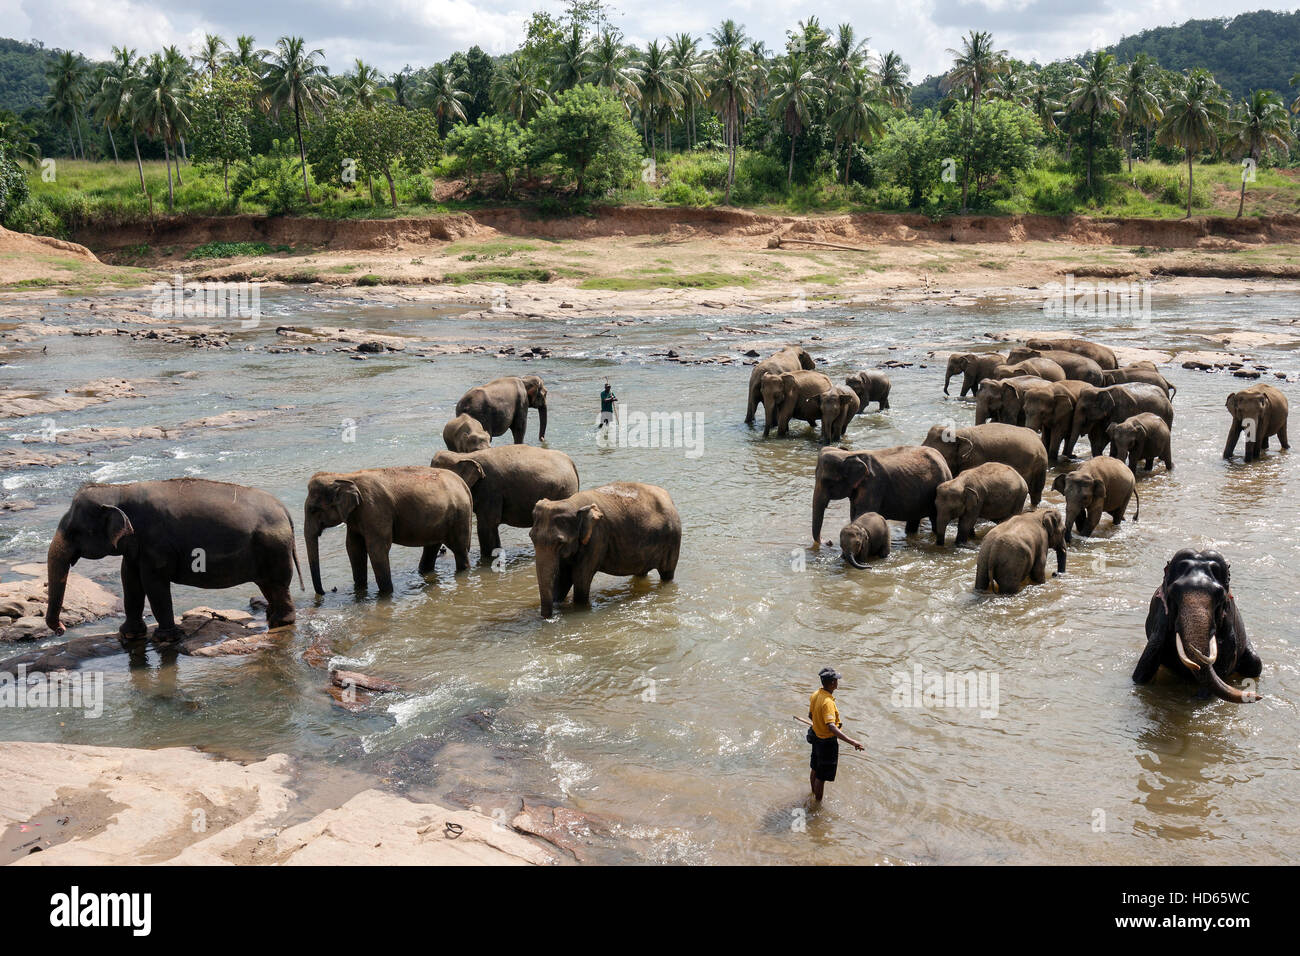 Asian or Asiatic elephants (Elephas maximus), herd bathing in Maha Oya River, keepers or mahouts nearby Stock Photo